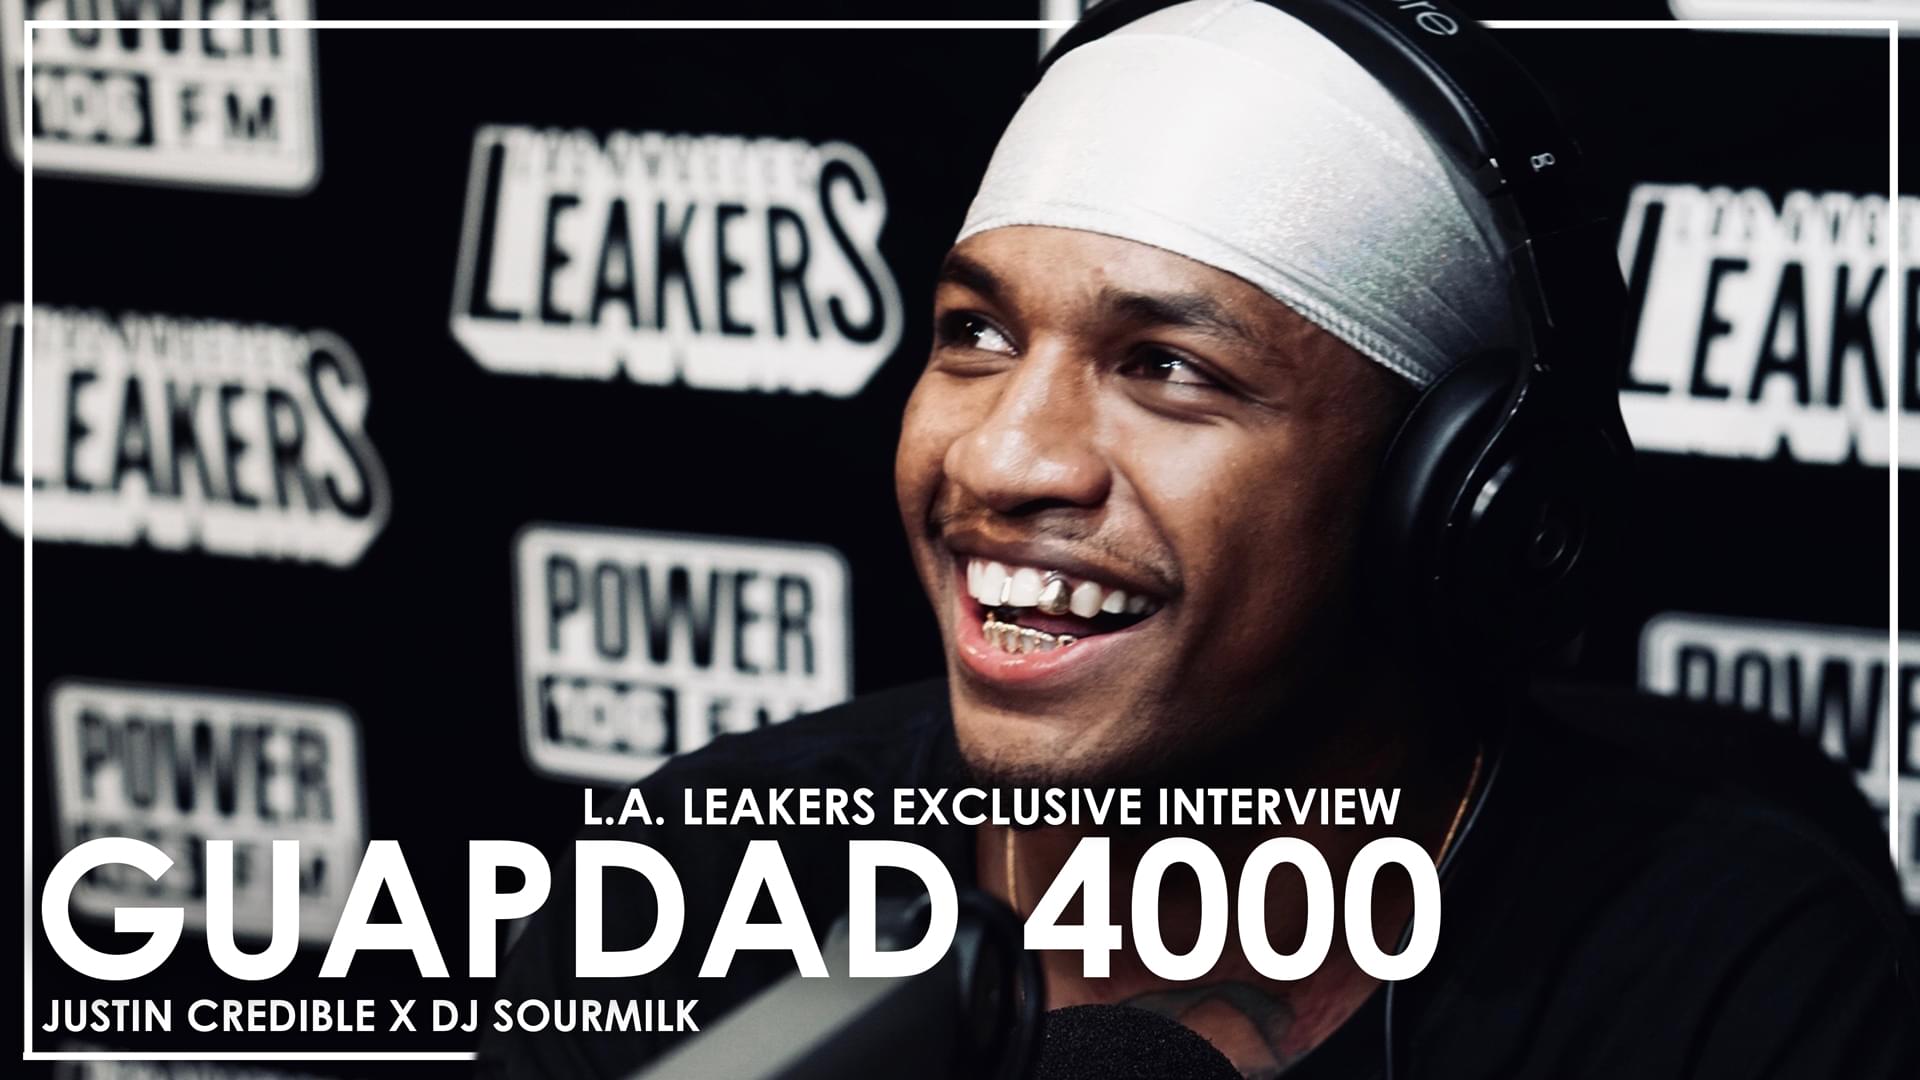 Guapdad 4000 On Losing NBA Finals Bet W/ Drake, Dreamville Sessions, “Flossin” Video & More [WATCH]